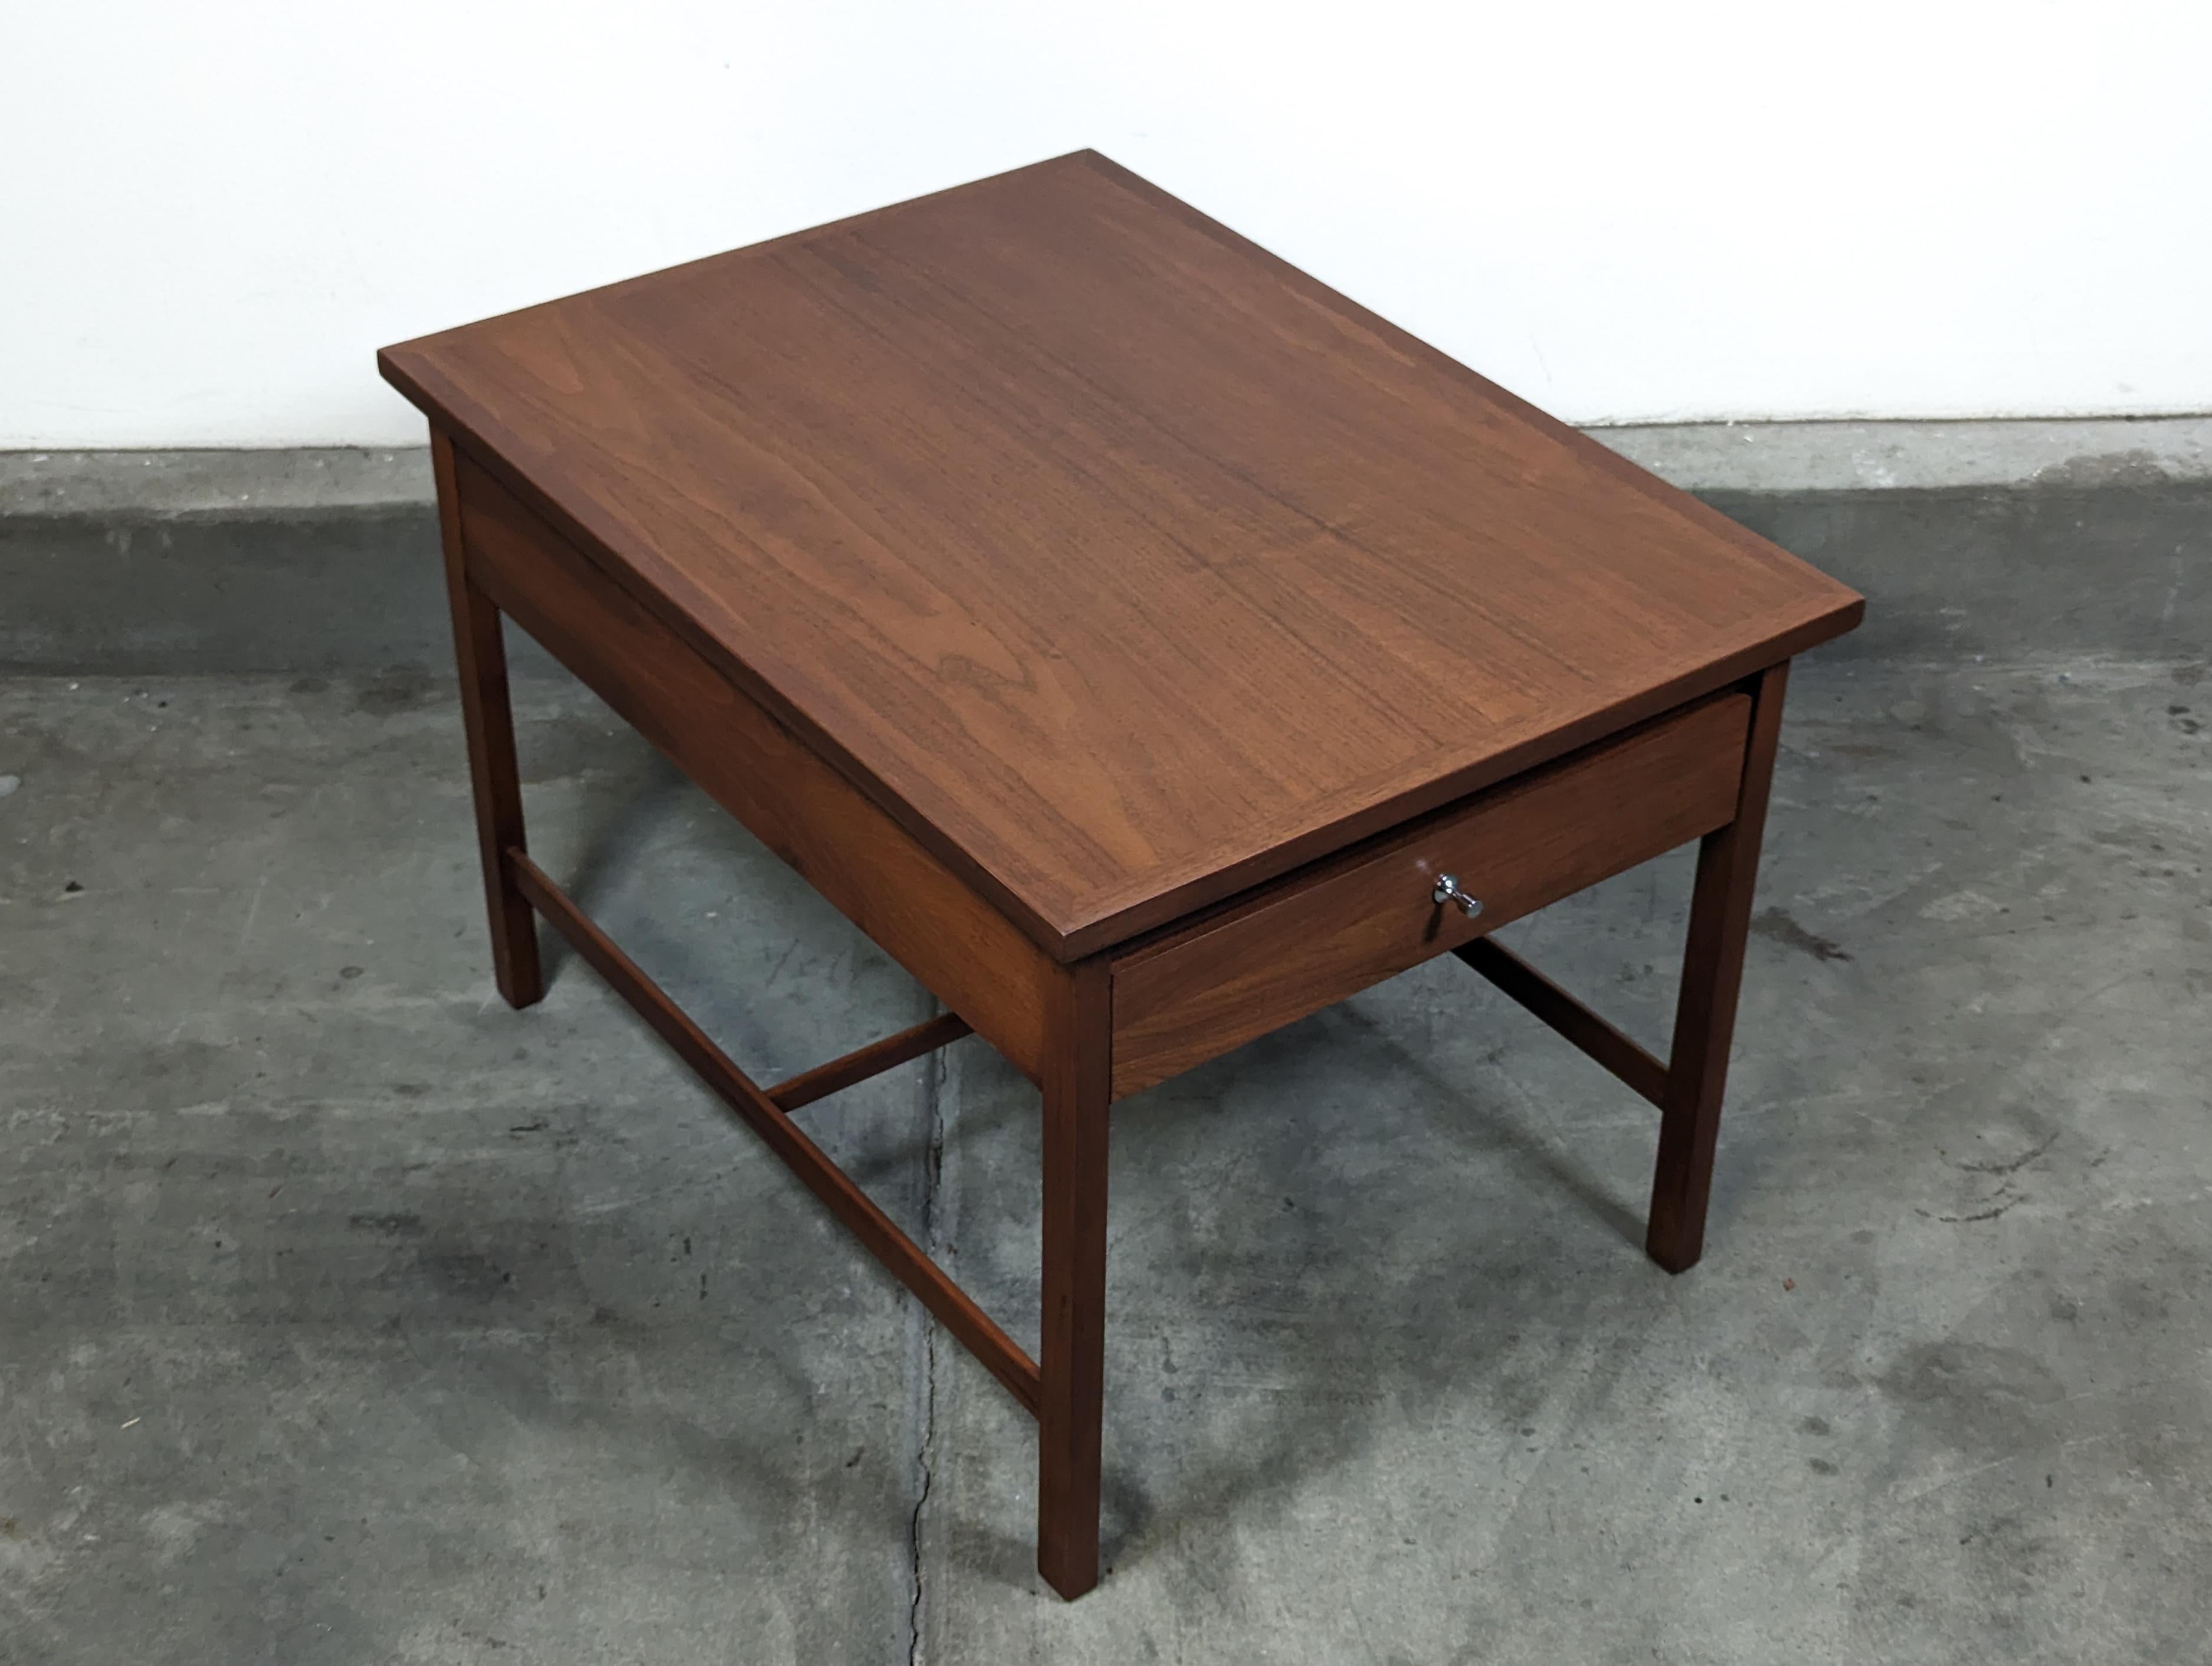 Immerse yourself in the timeless elegance of mid-century modern design with this exquisite side table, a true gem designed by the iconic Paul McCobb for Lane Furniture's celebrated 'Delineator' line. Dating back to the 1960s, this table is a